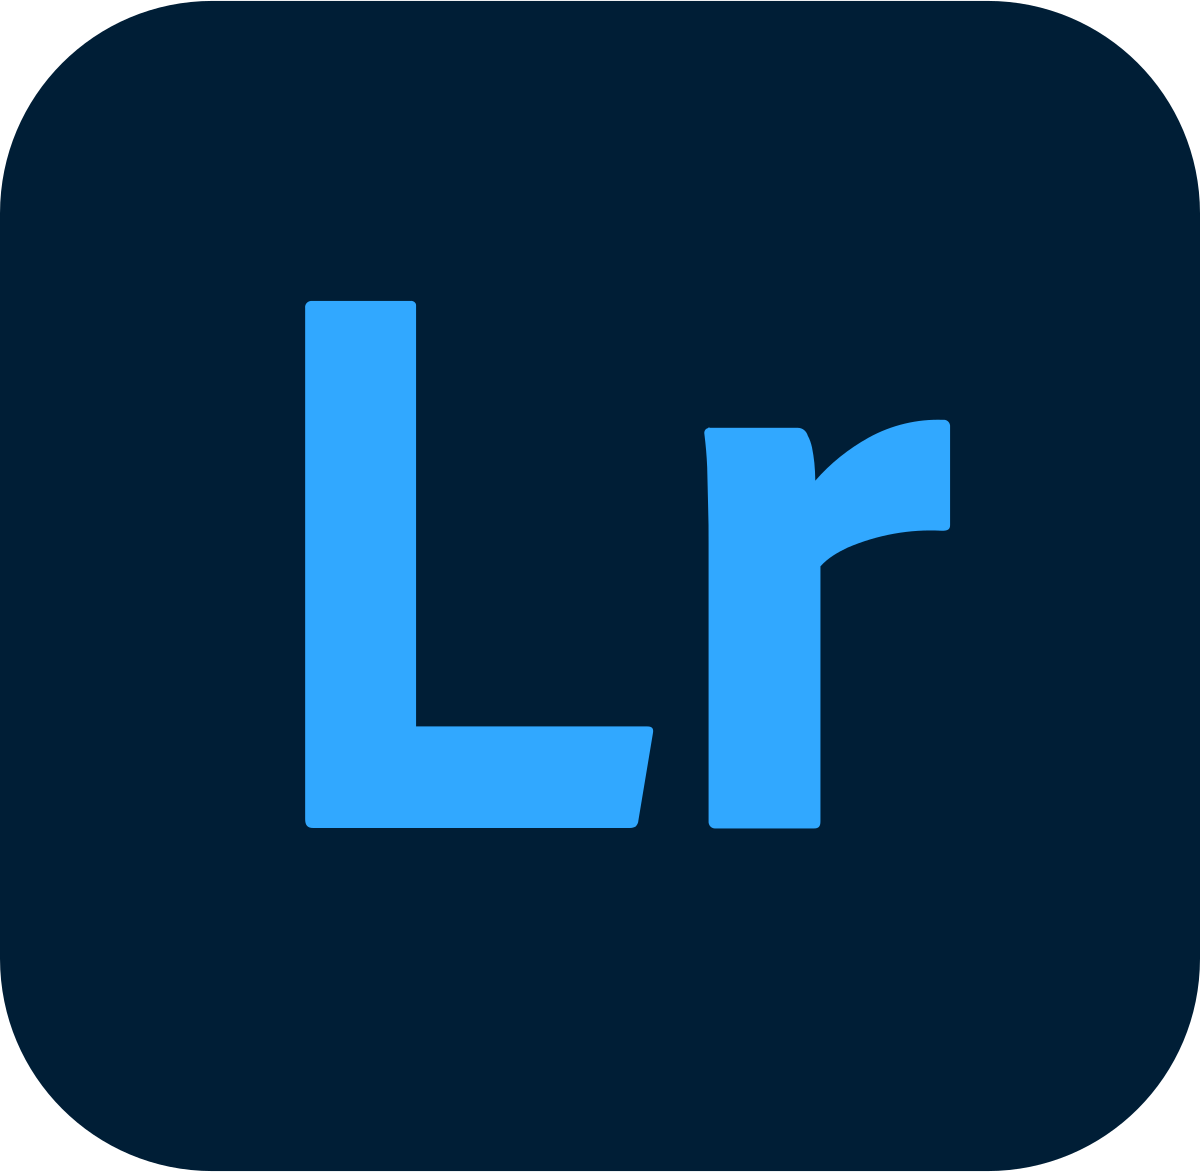 adobe photoshop lightroom free download full version for android